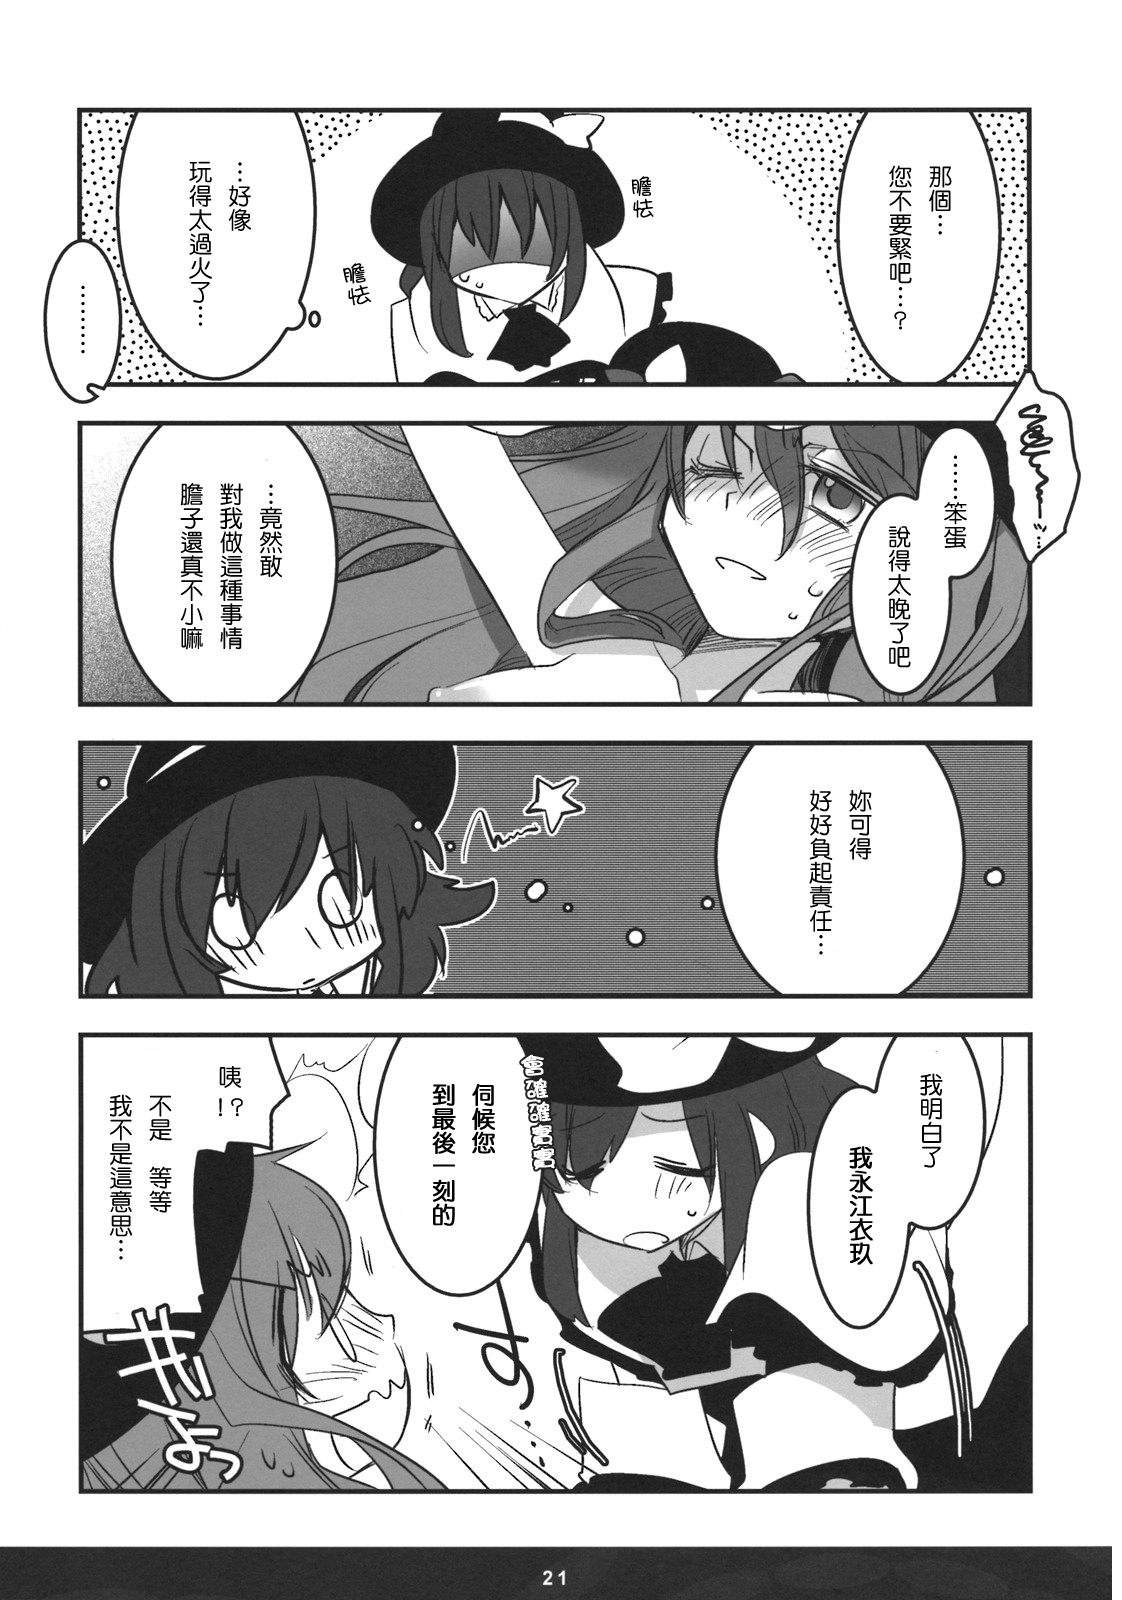 (C74) [Rengeza (Inui Nui)] Skyscraper (Touhou Project) [Chinese] [Nice漢化] page 20 full